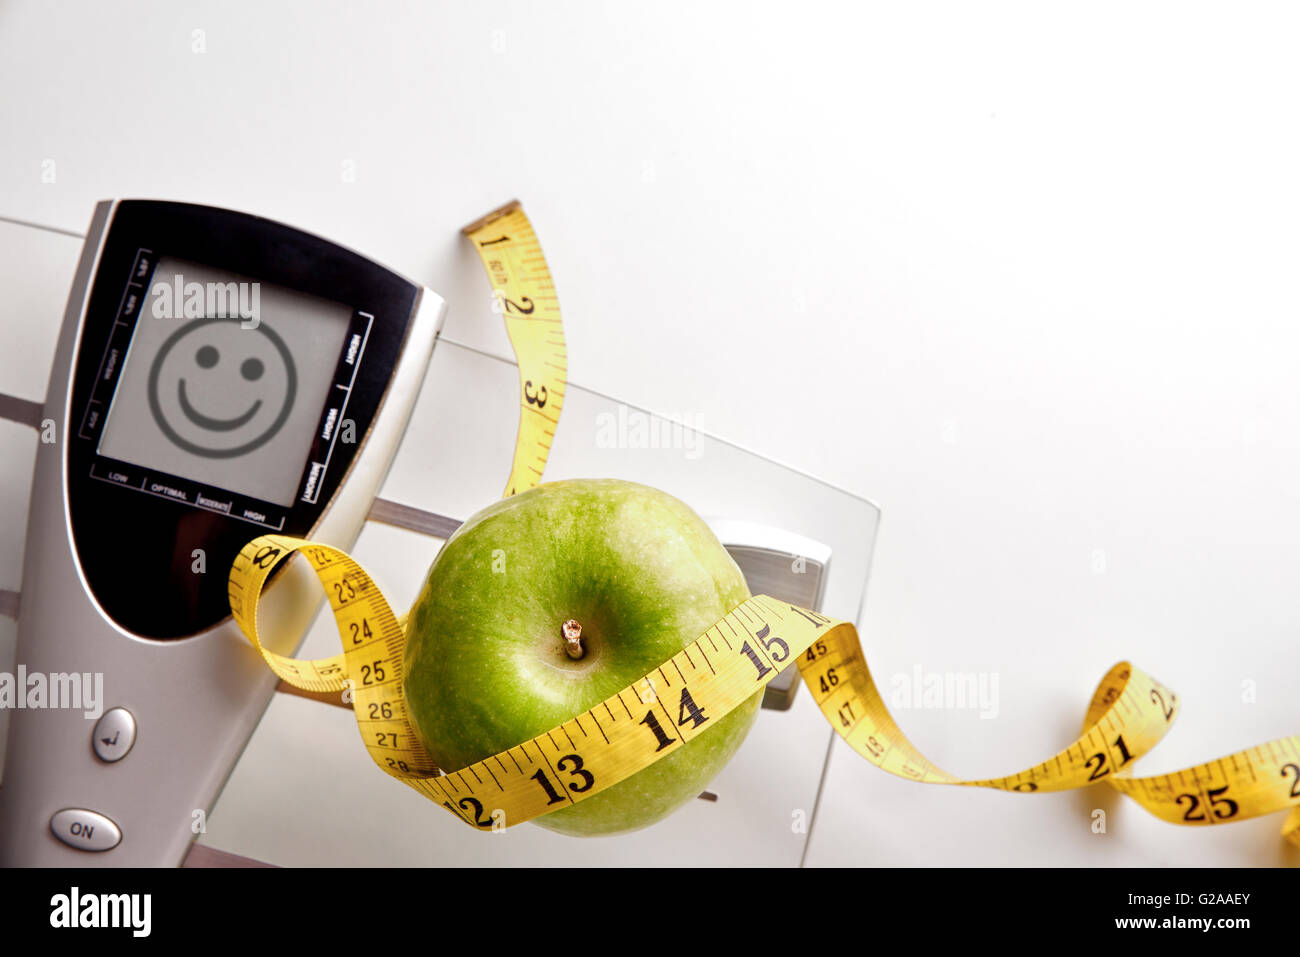 Weight measurement - Stock Image - M730/0511 - Science Photo Library